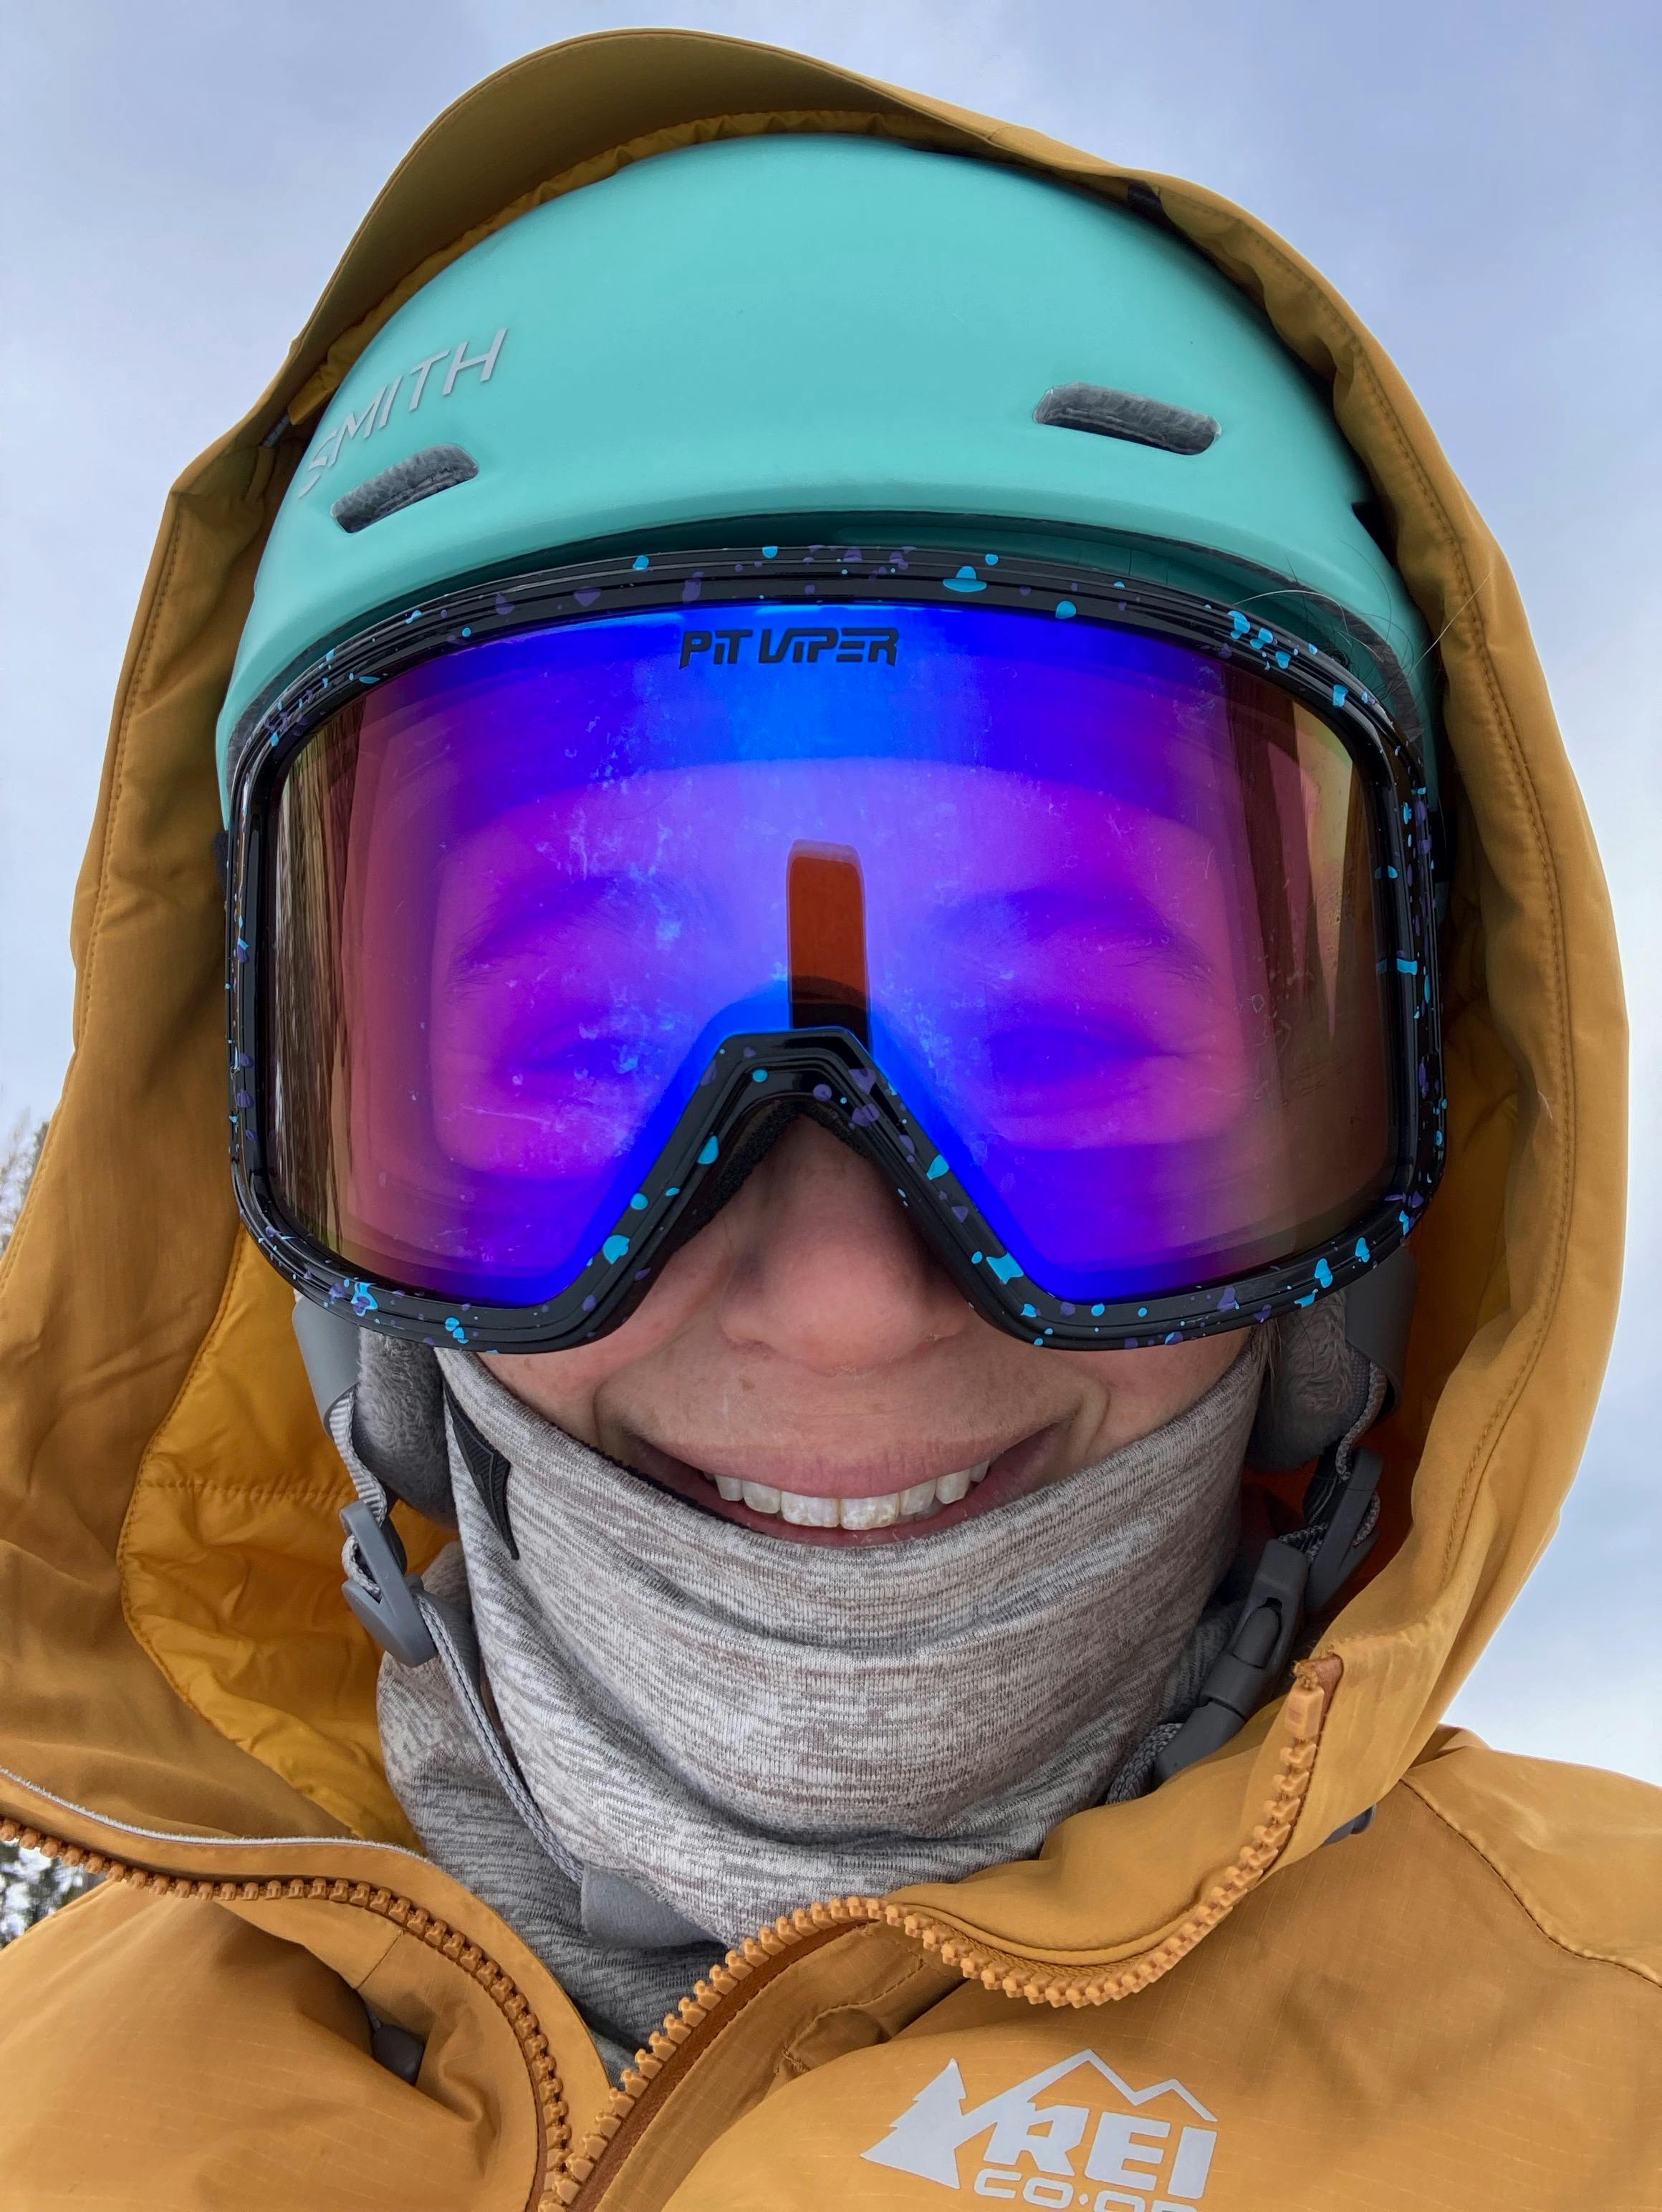 Close up of a snowboarder's face with pale skin, a light blue helmet and blue and purple mirrored lenses smiling into the camera.